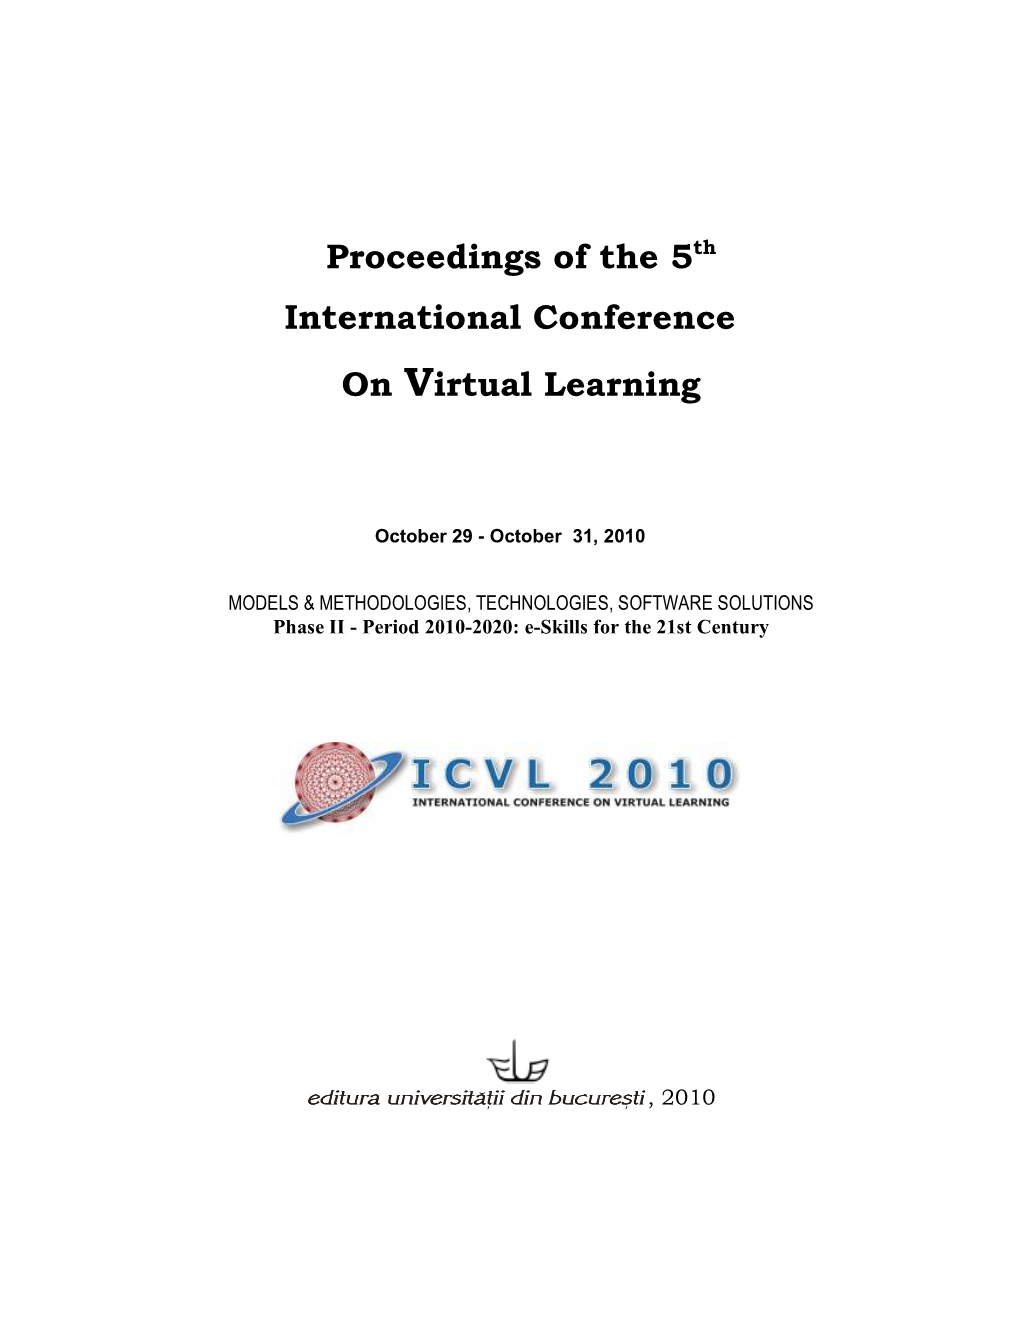 Proceedings of the 5Th International Conference on Virtual Learning